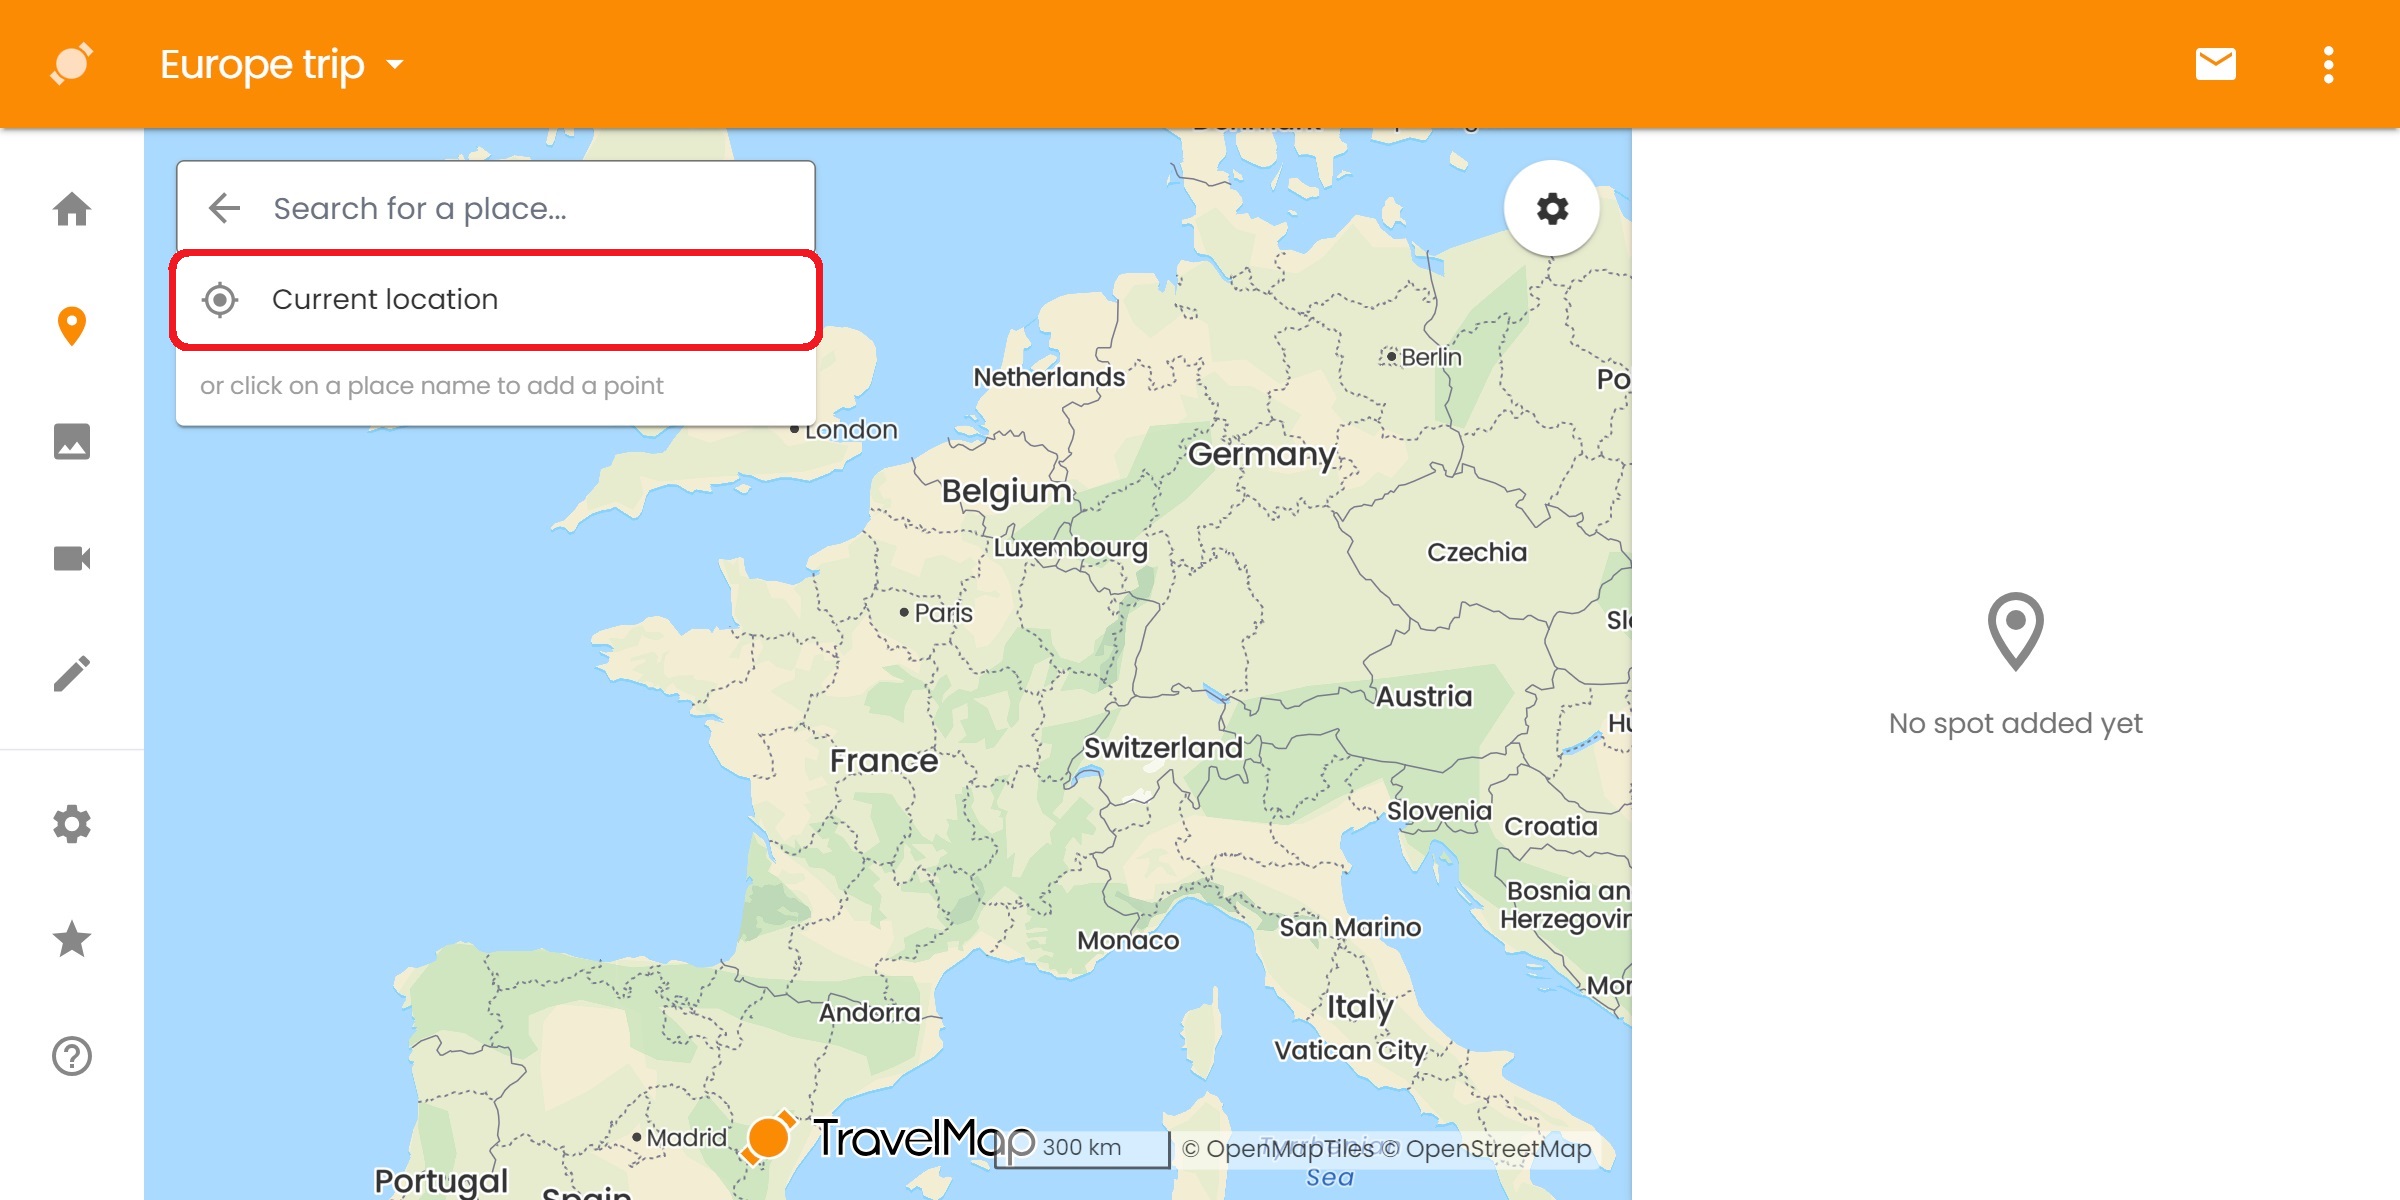 TravelMap admin map use current location to add new spots